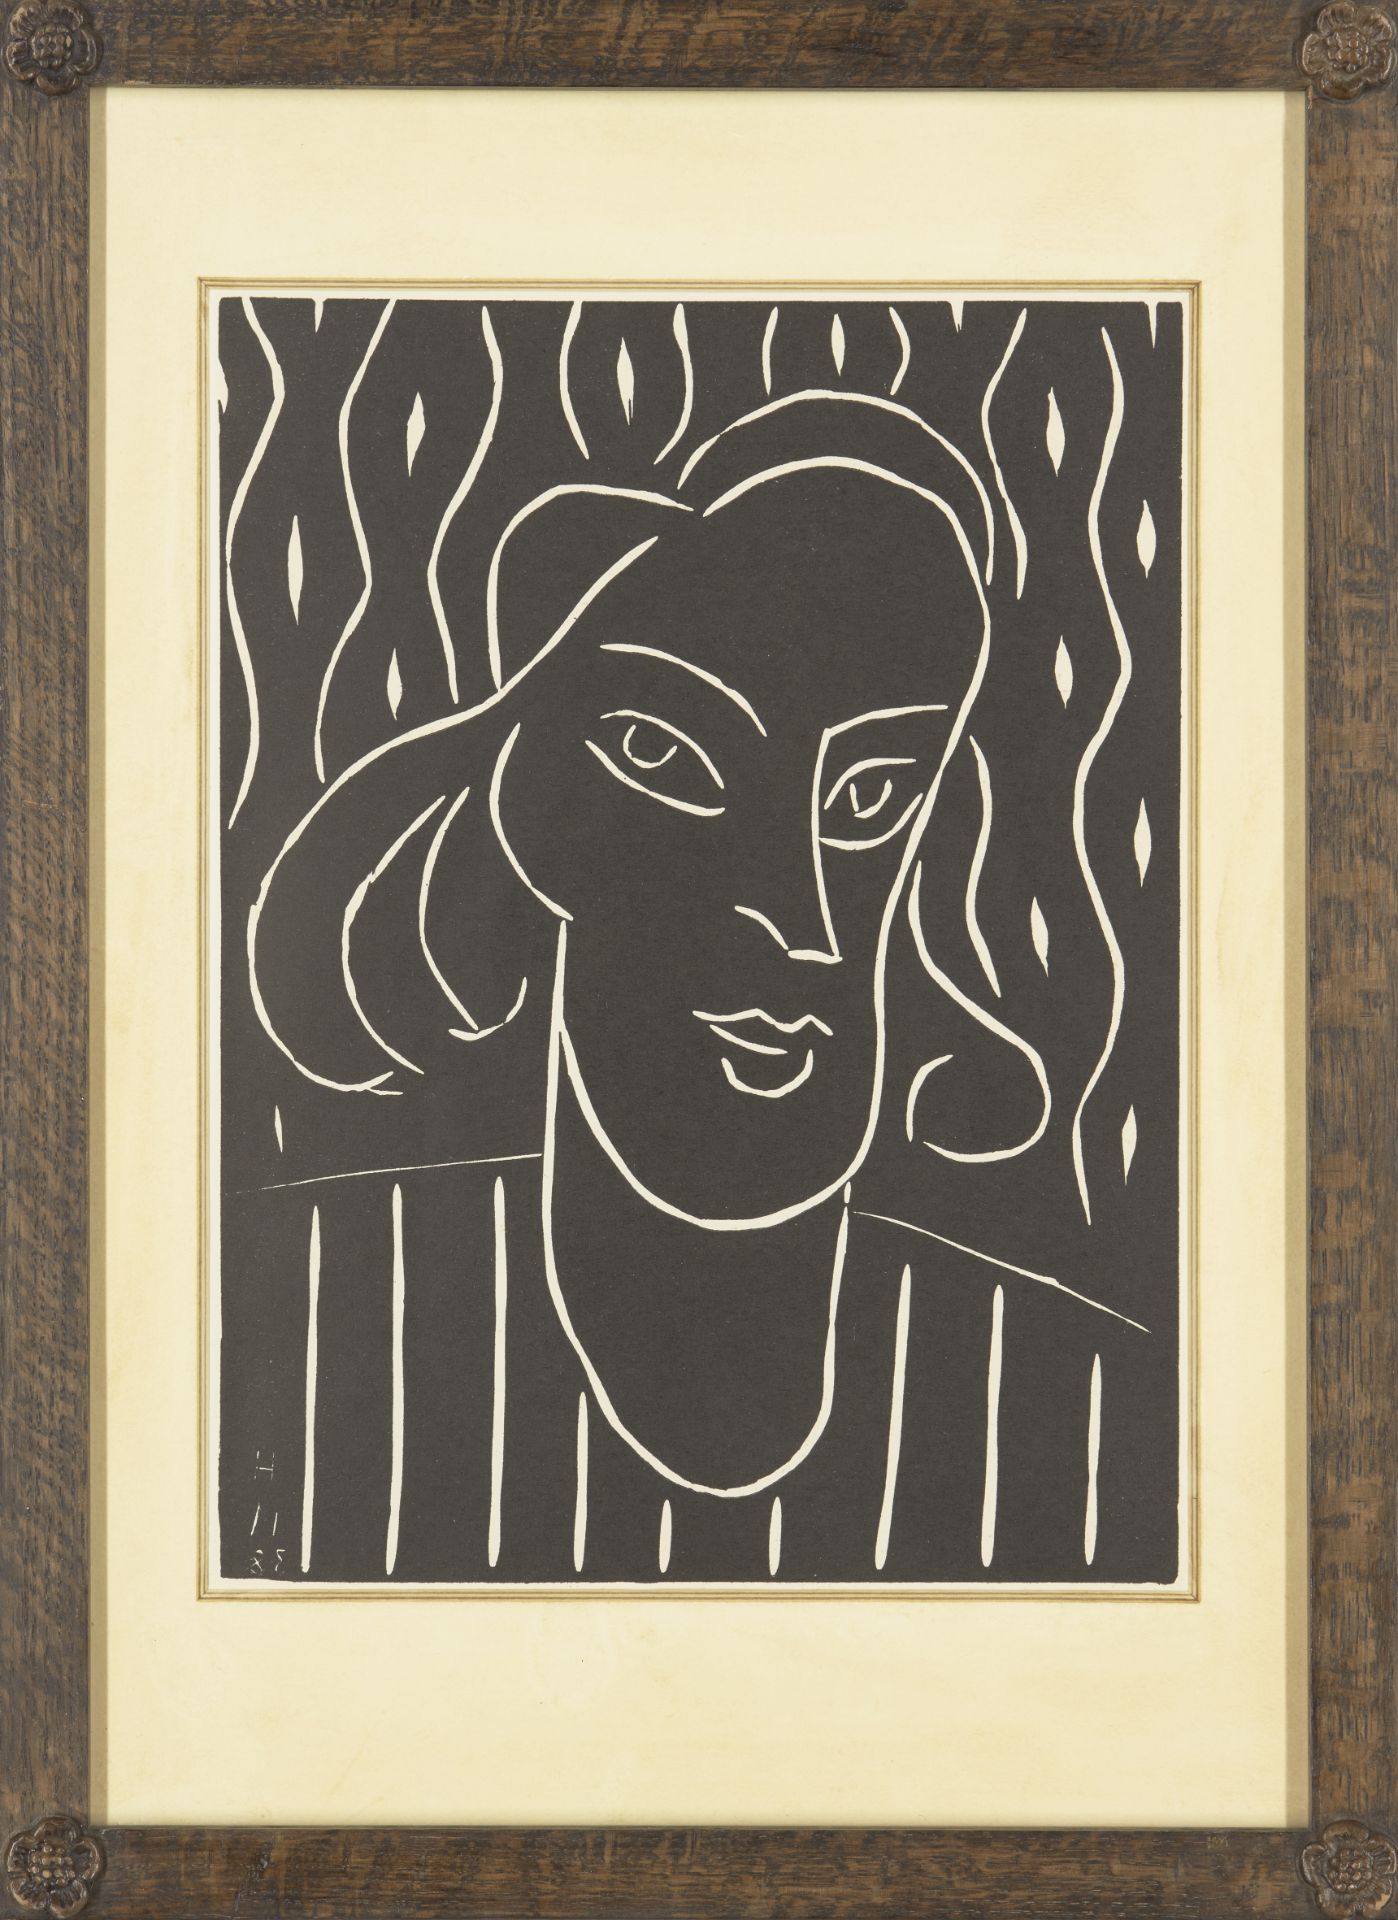 Henri Matisse, French 1869-1954, Teeny,1938/1959; linocut on wove, 30.3 x 22.7 cm, (framed) (ARR) - Image 4 of 4